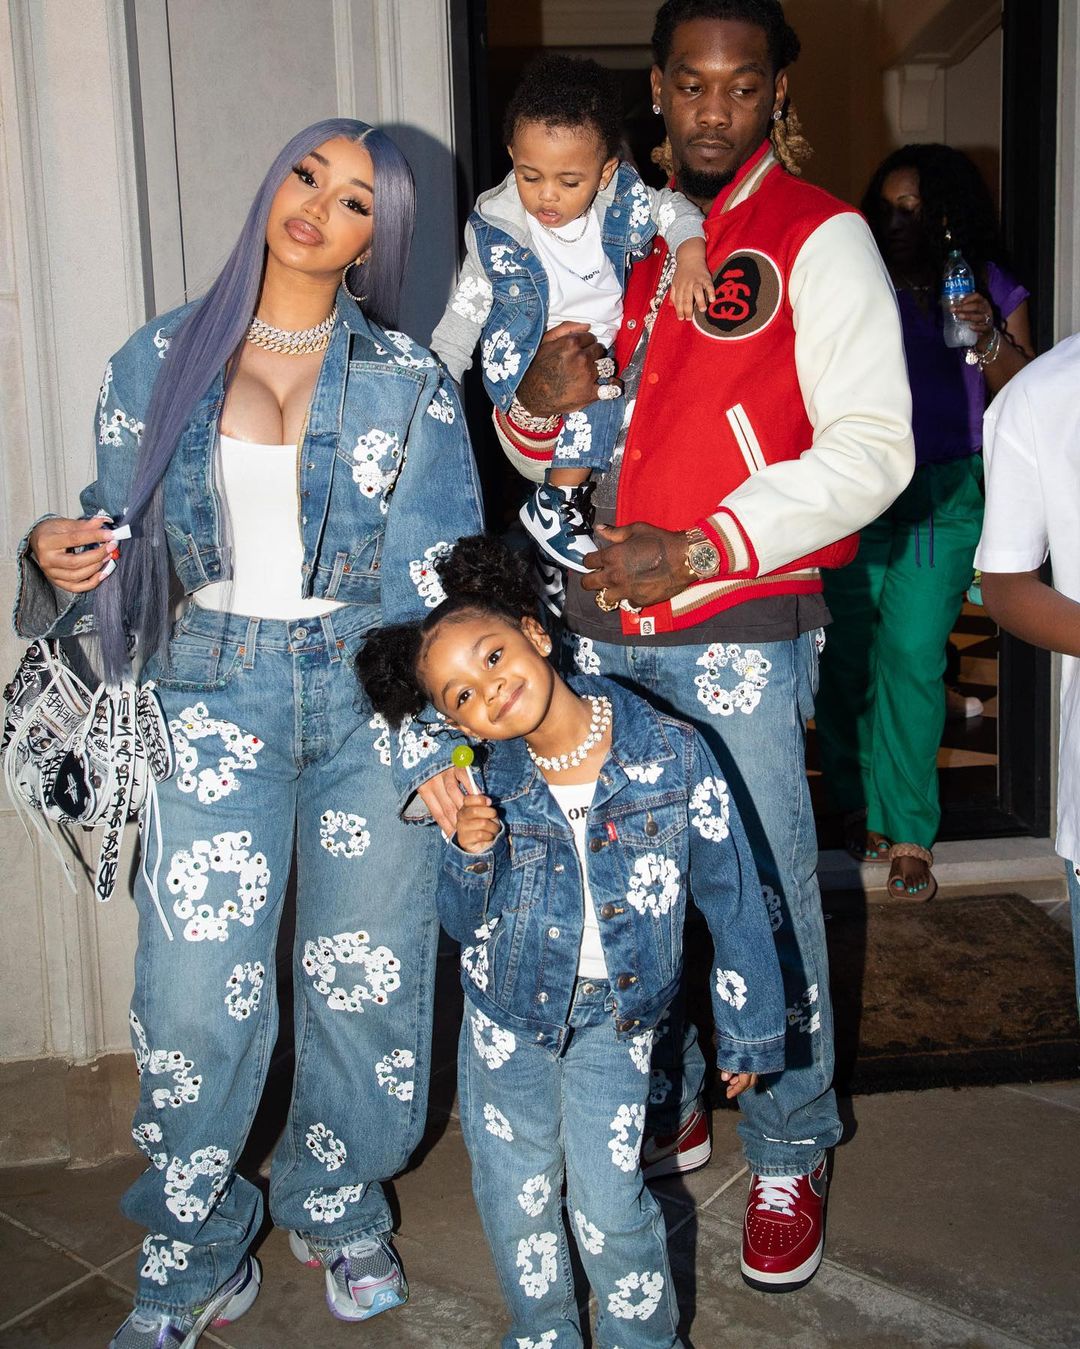 Cardi B & Offset went all out to celebrate their son Wave's first birthday